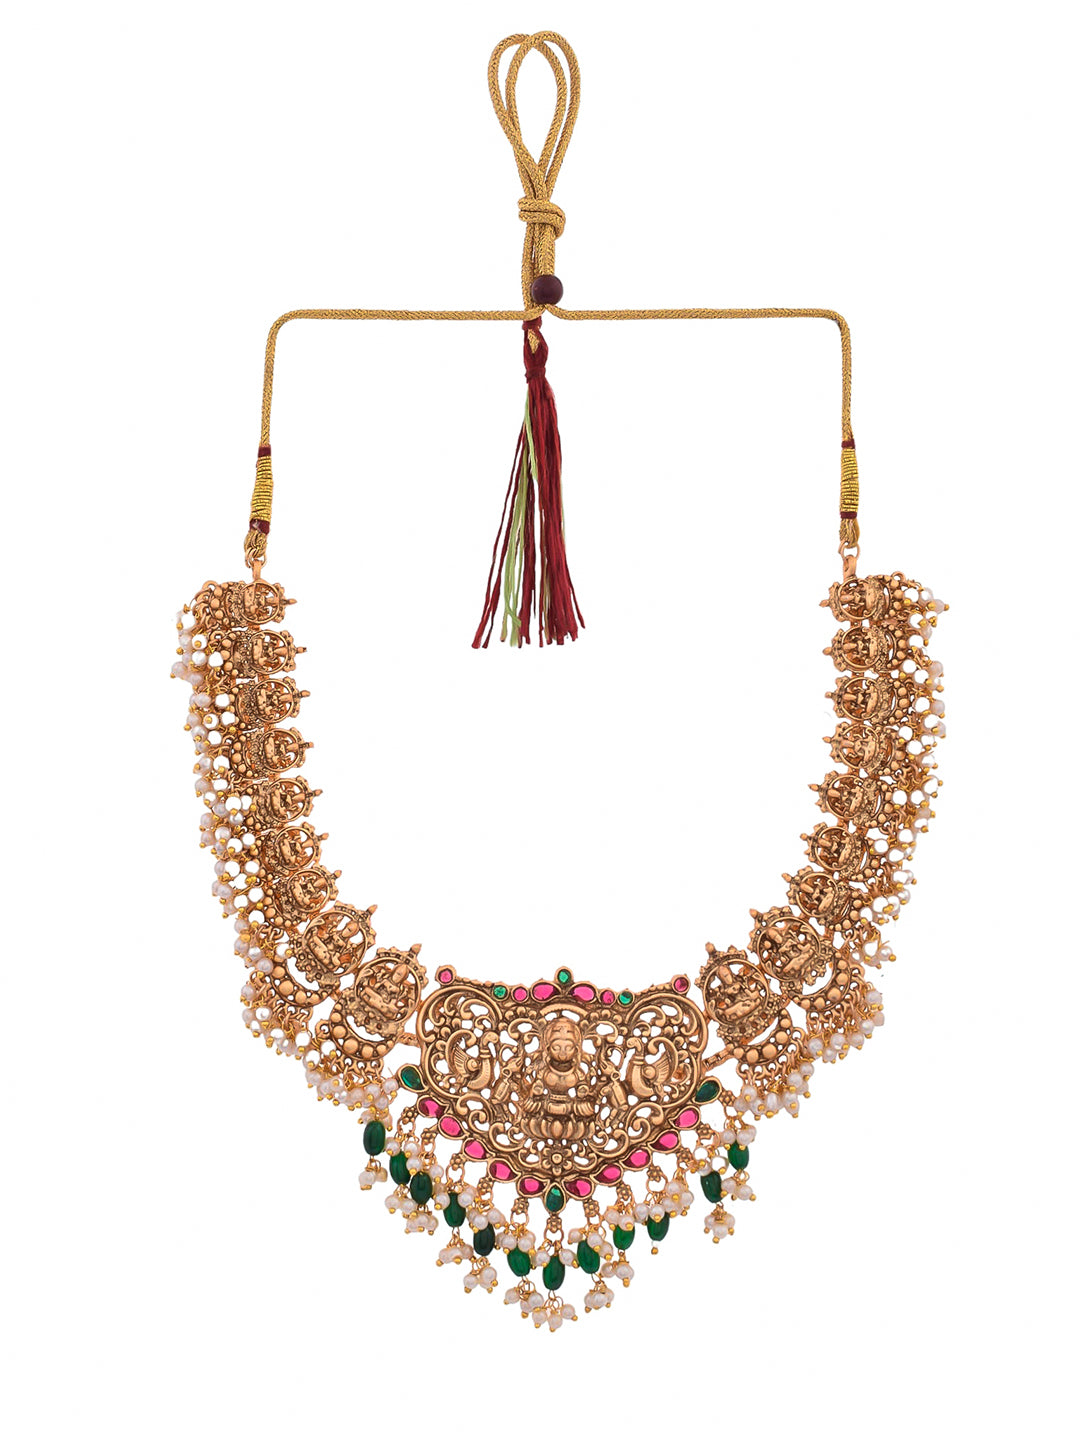 this Gold plated South Indian Traditional Heavy Temple jewellery set is the perfect accessory for any special occasion. The intricate design and traditional look add an air of elegance and grace to any outfit, making it an ideal choice for women, brides, and girls.